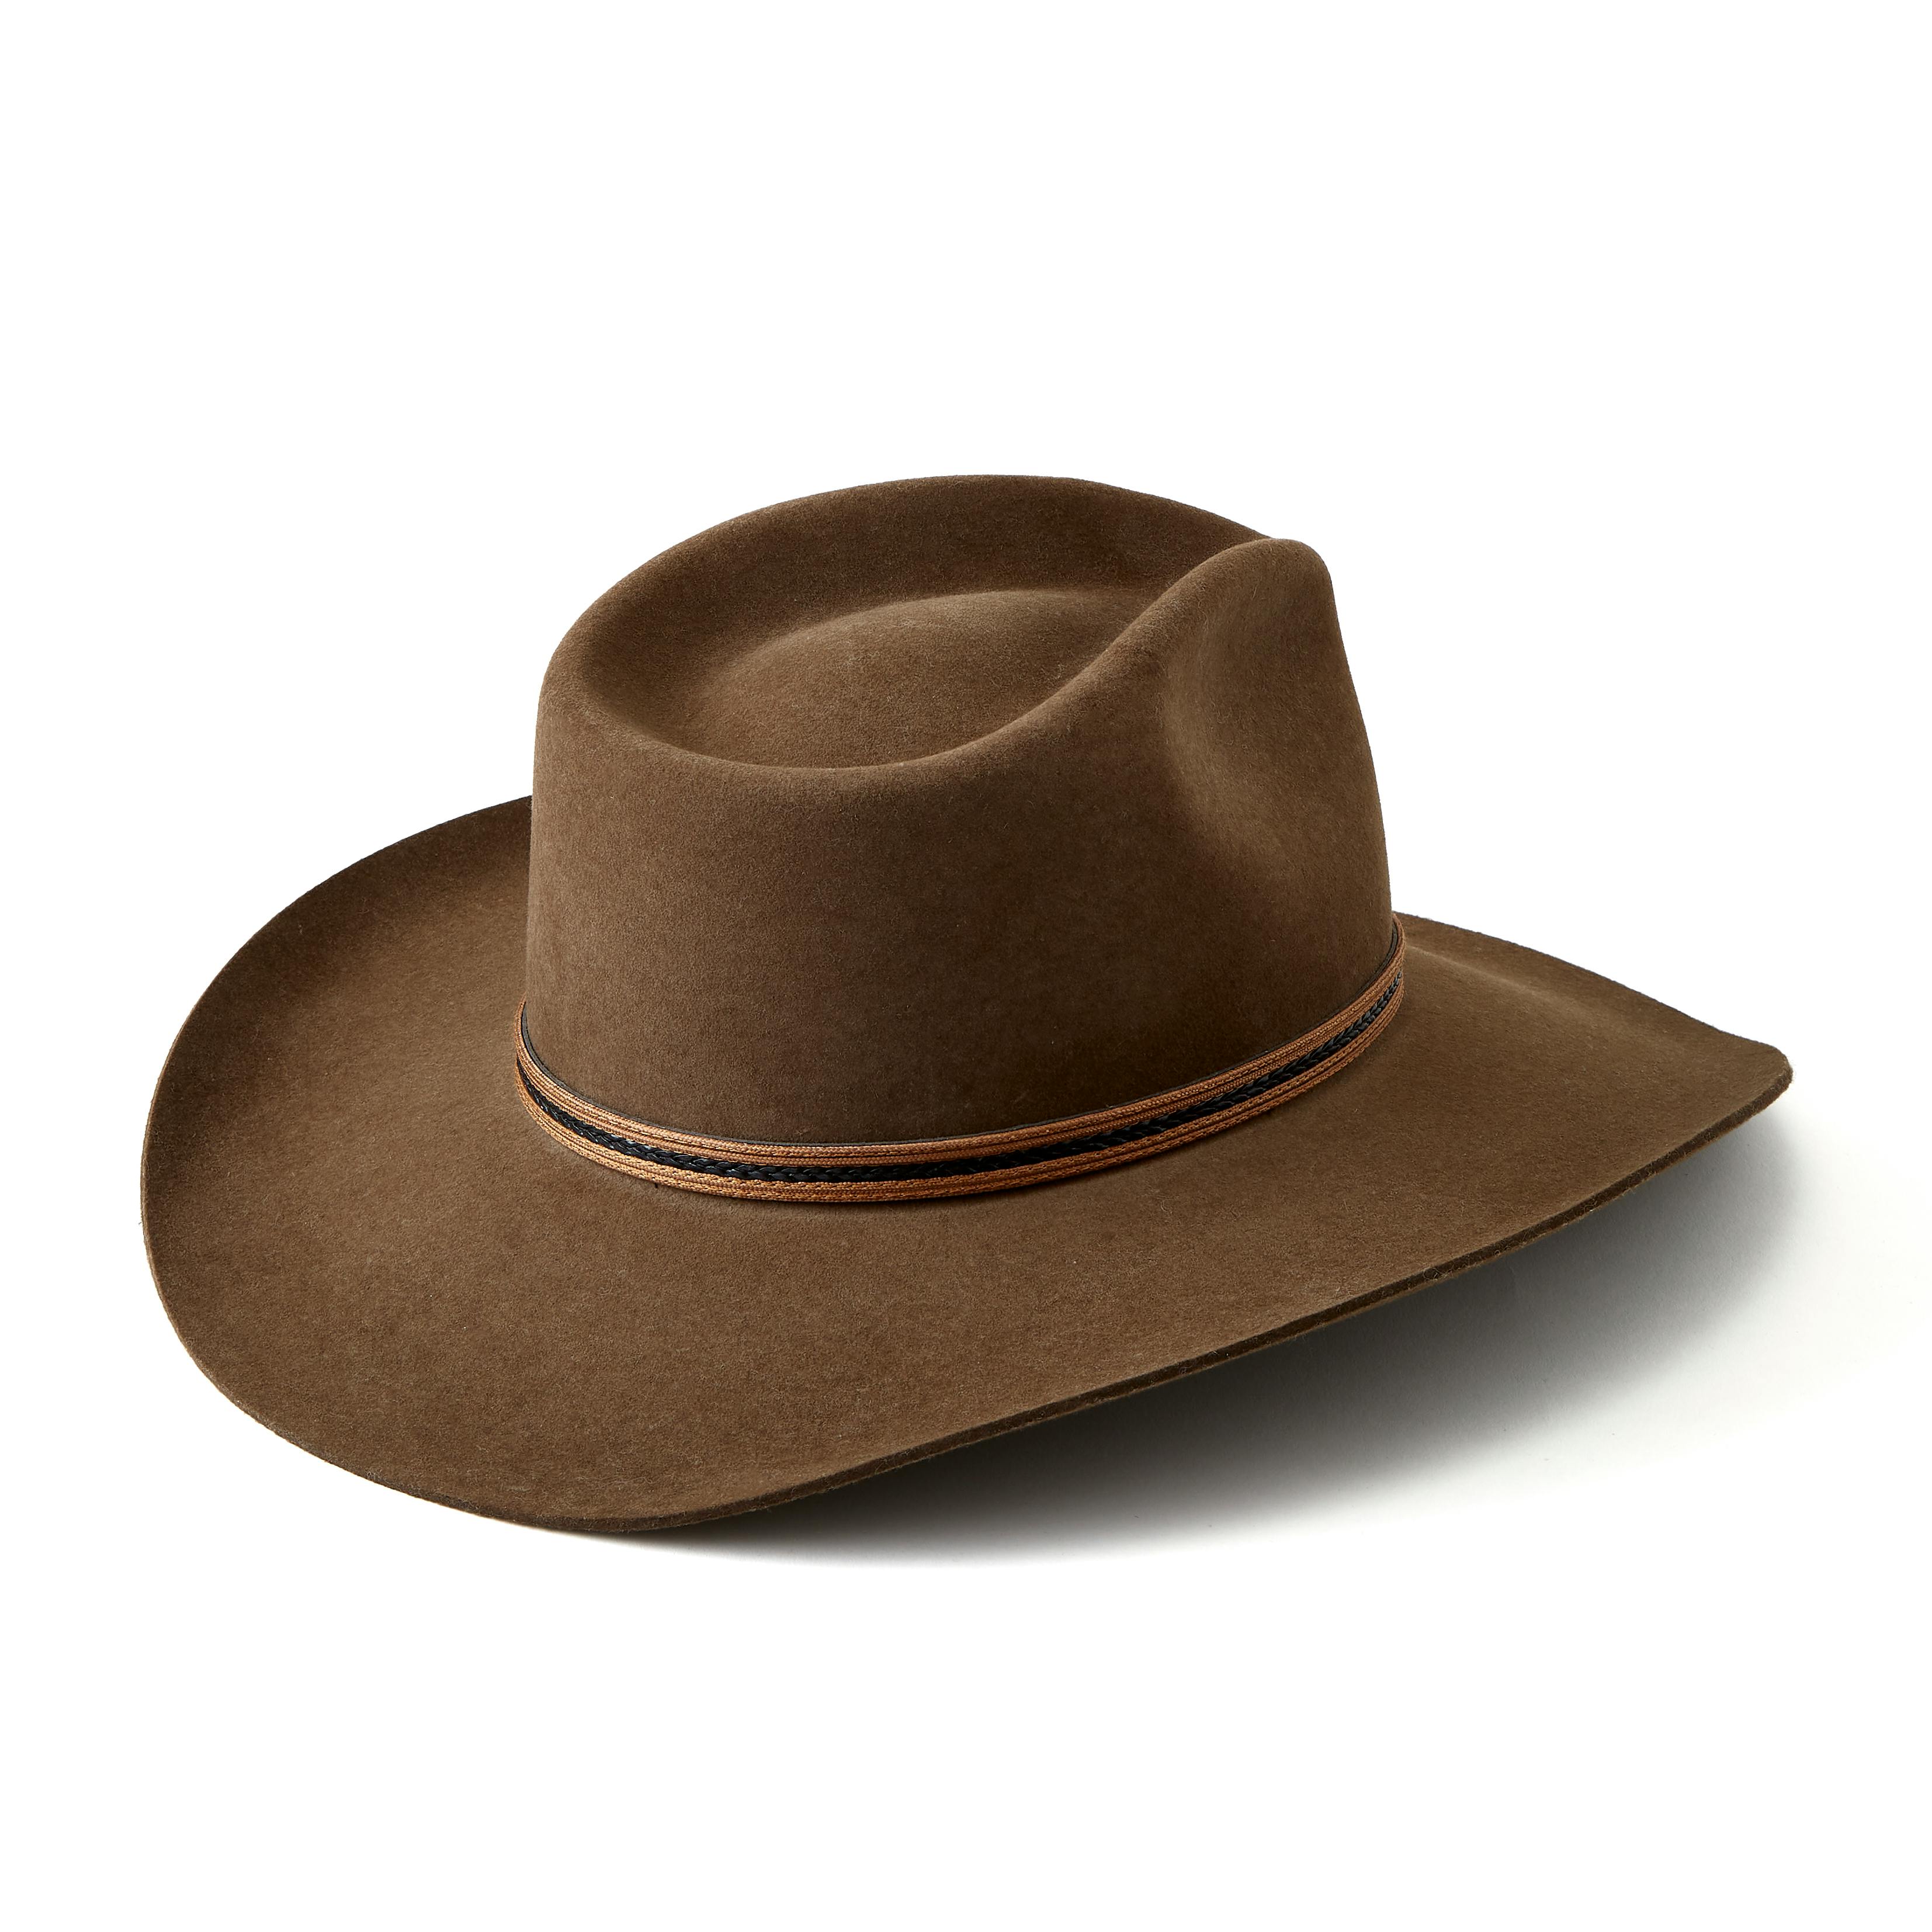 How to Determine Your Hat Size - Stetson Stories